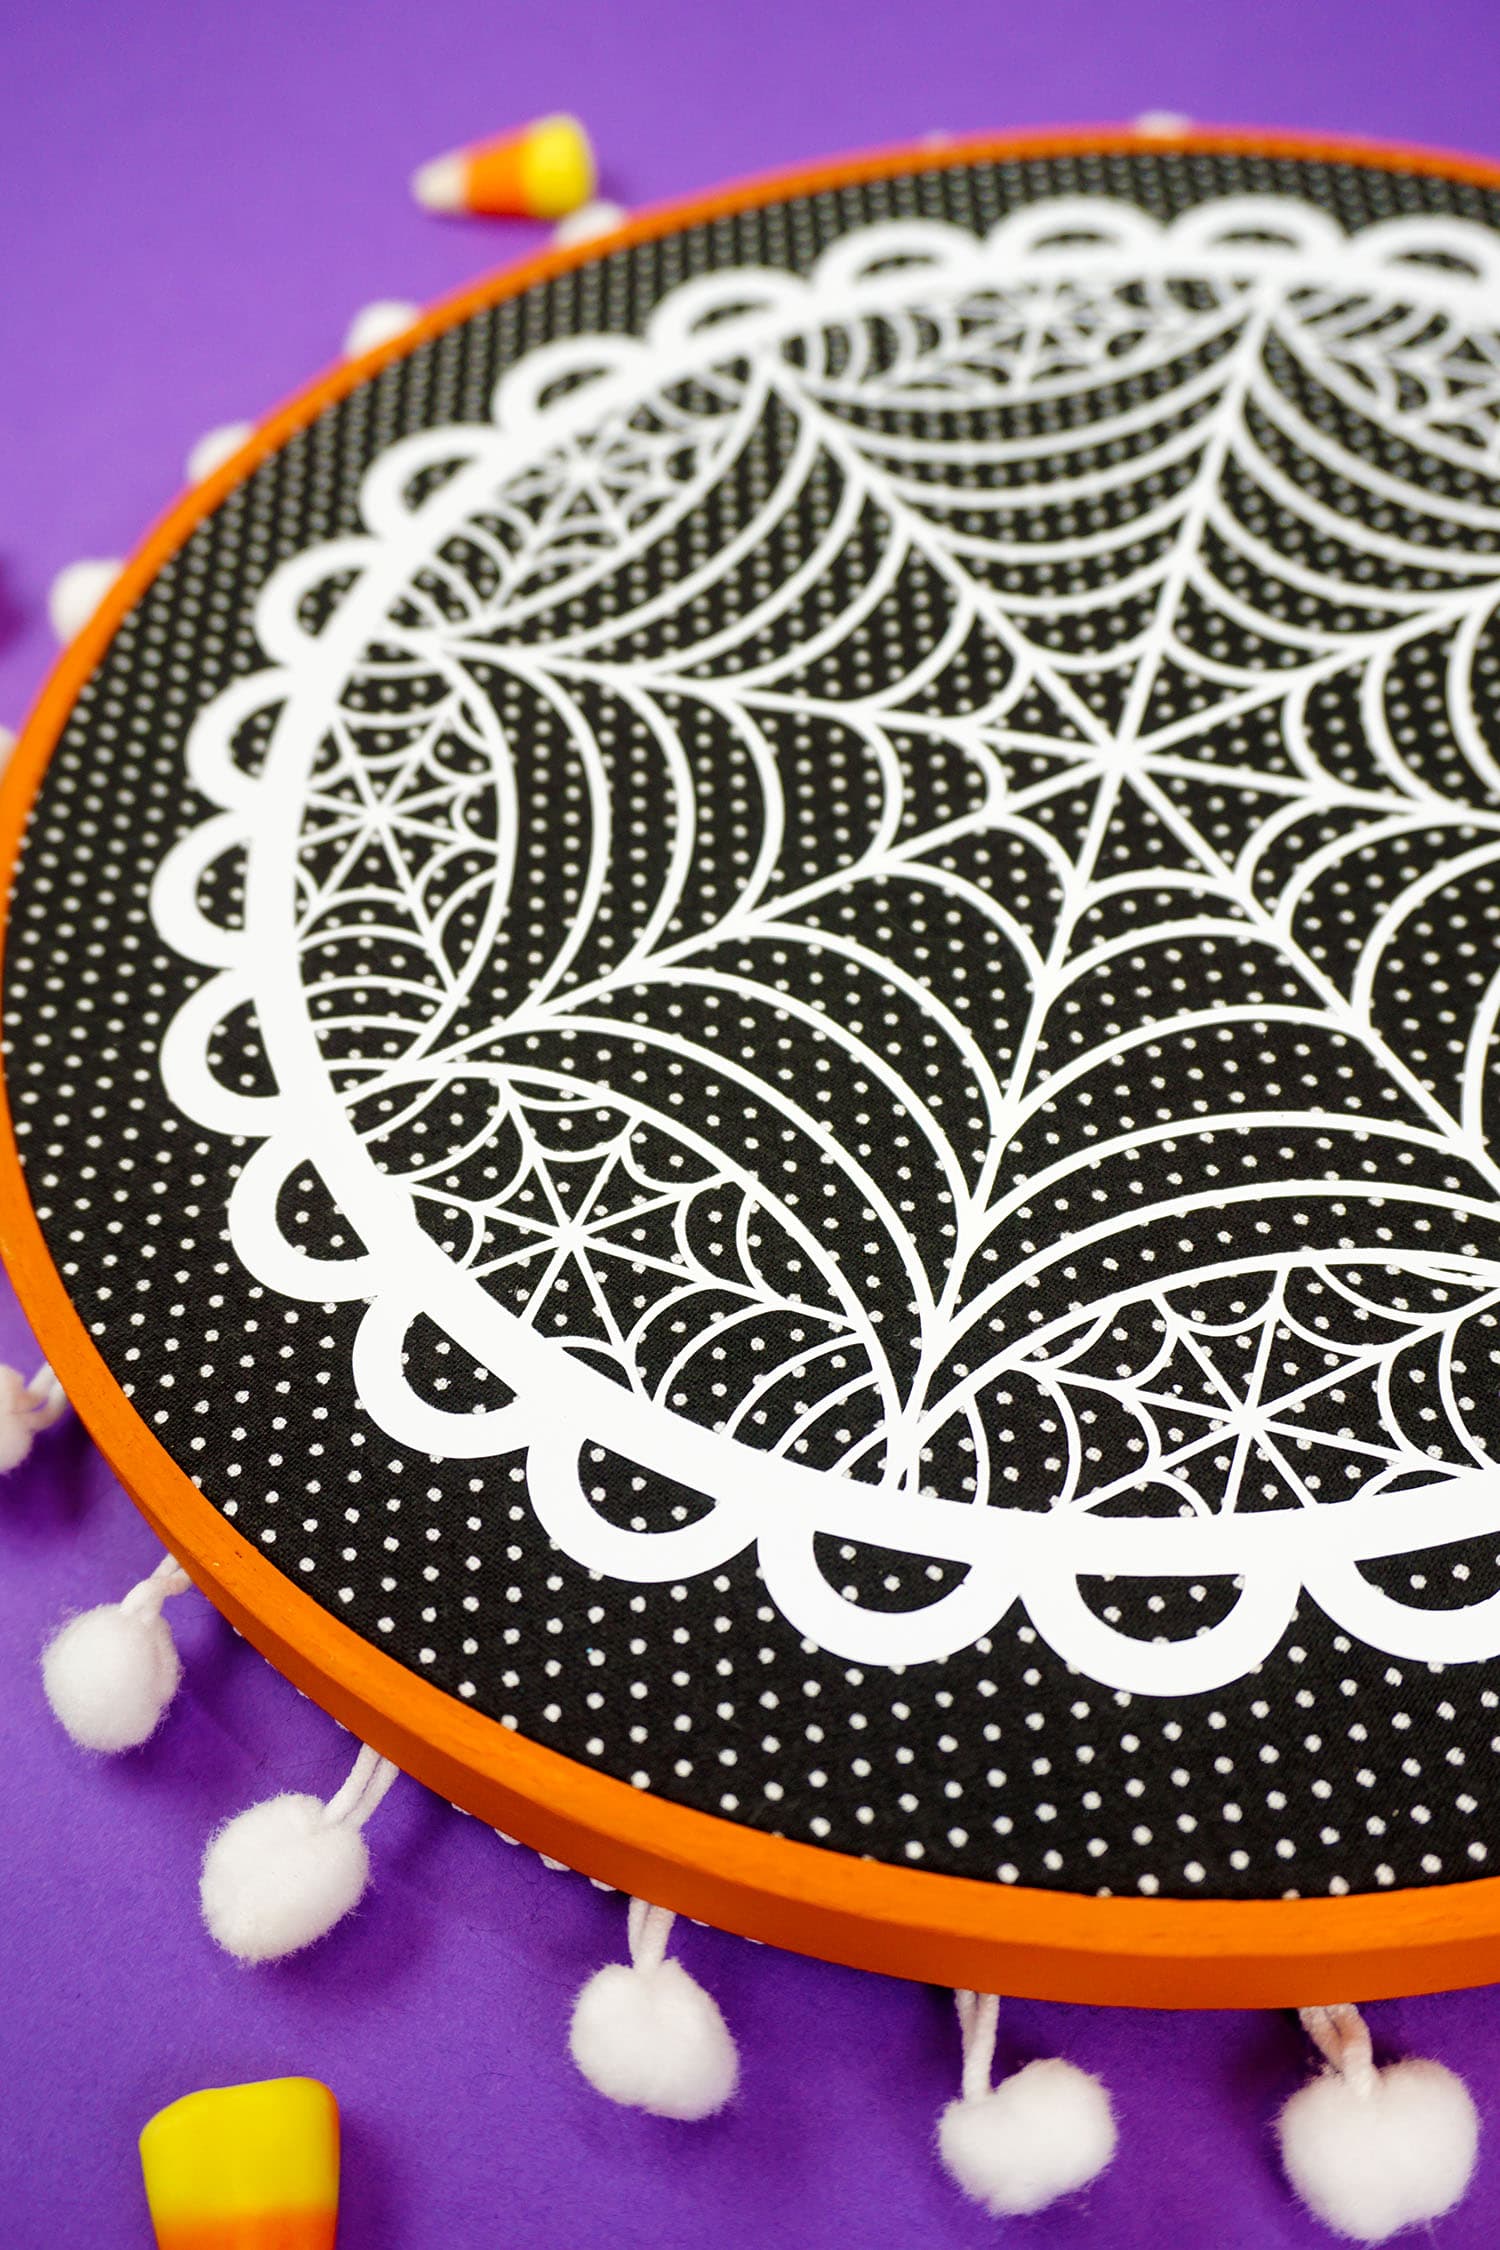 spider dangling from spider web embroidery hoop project